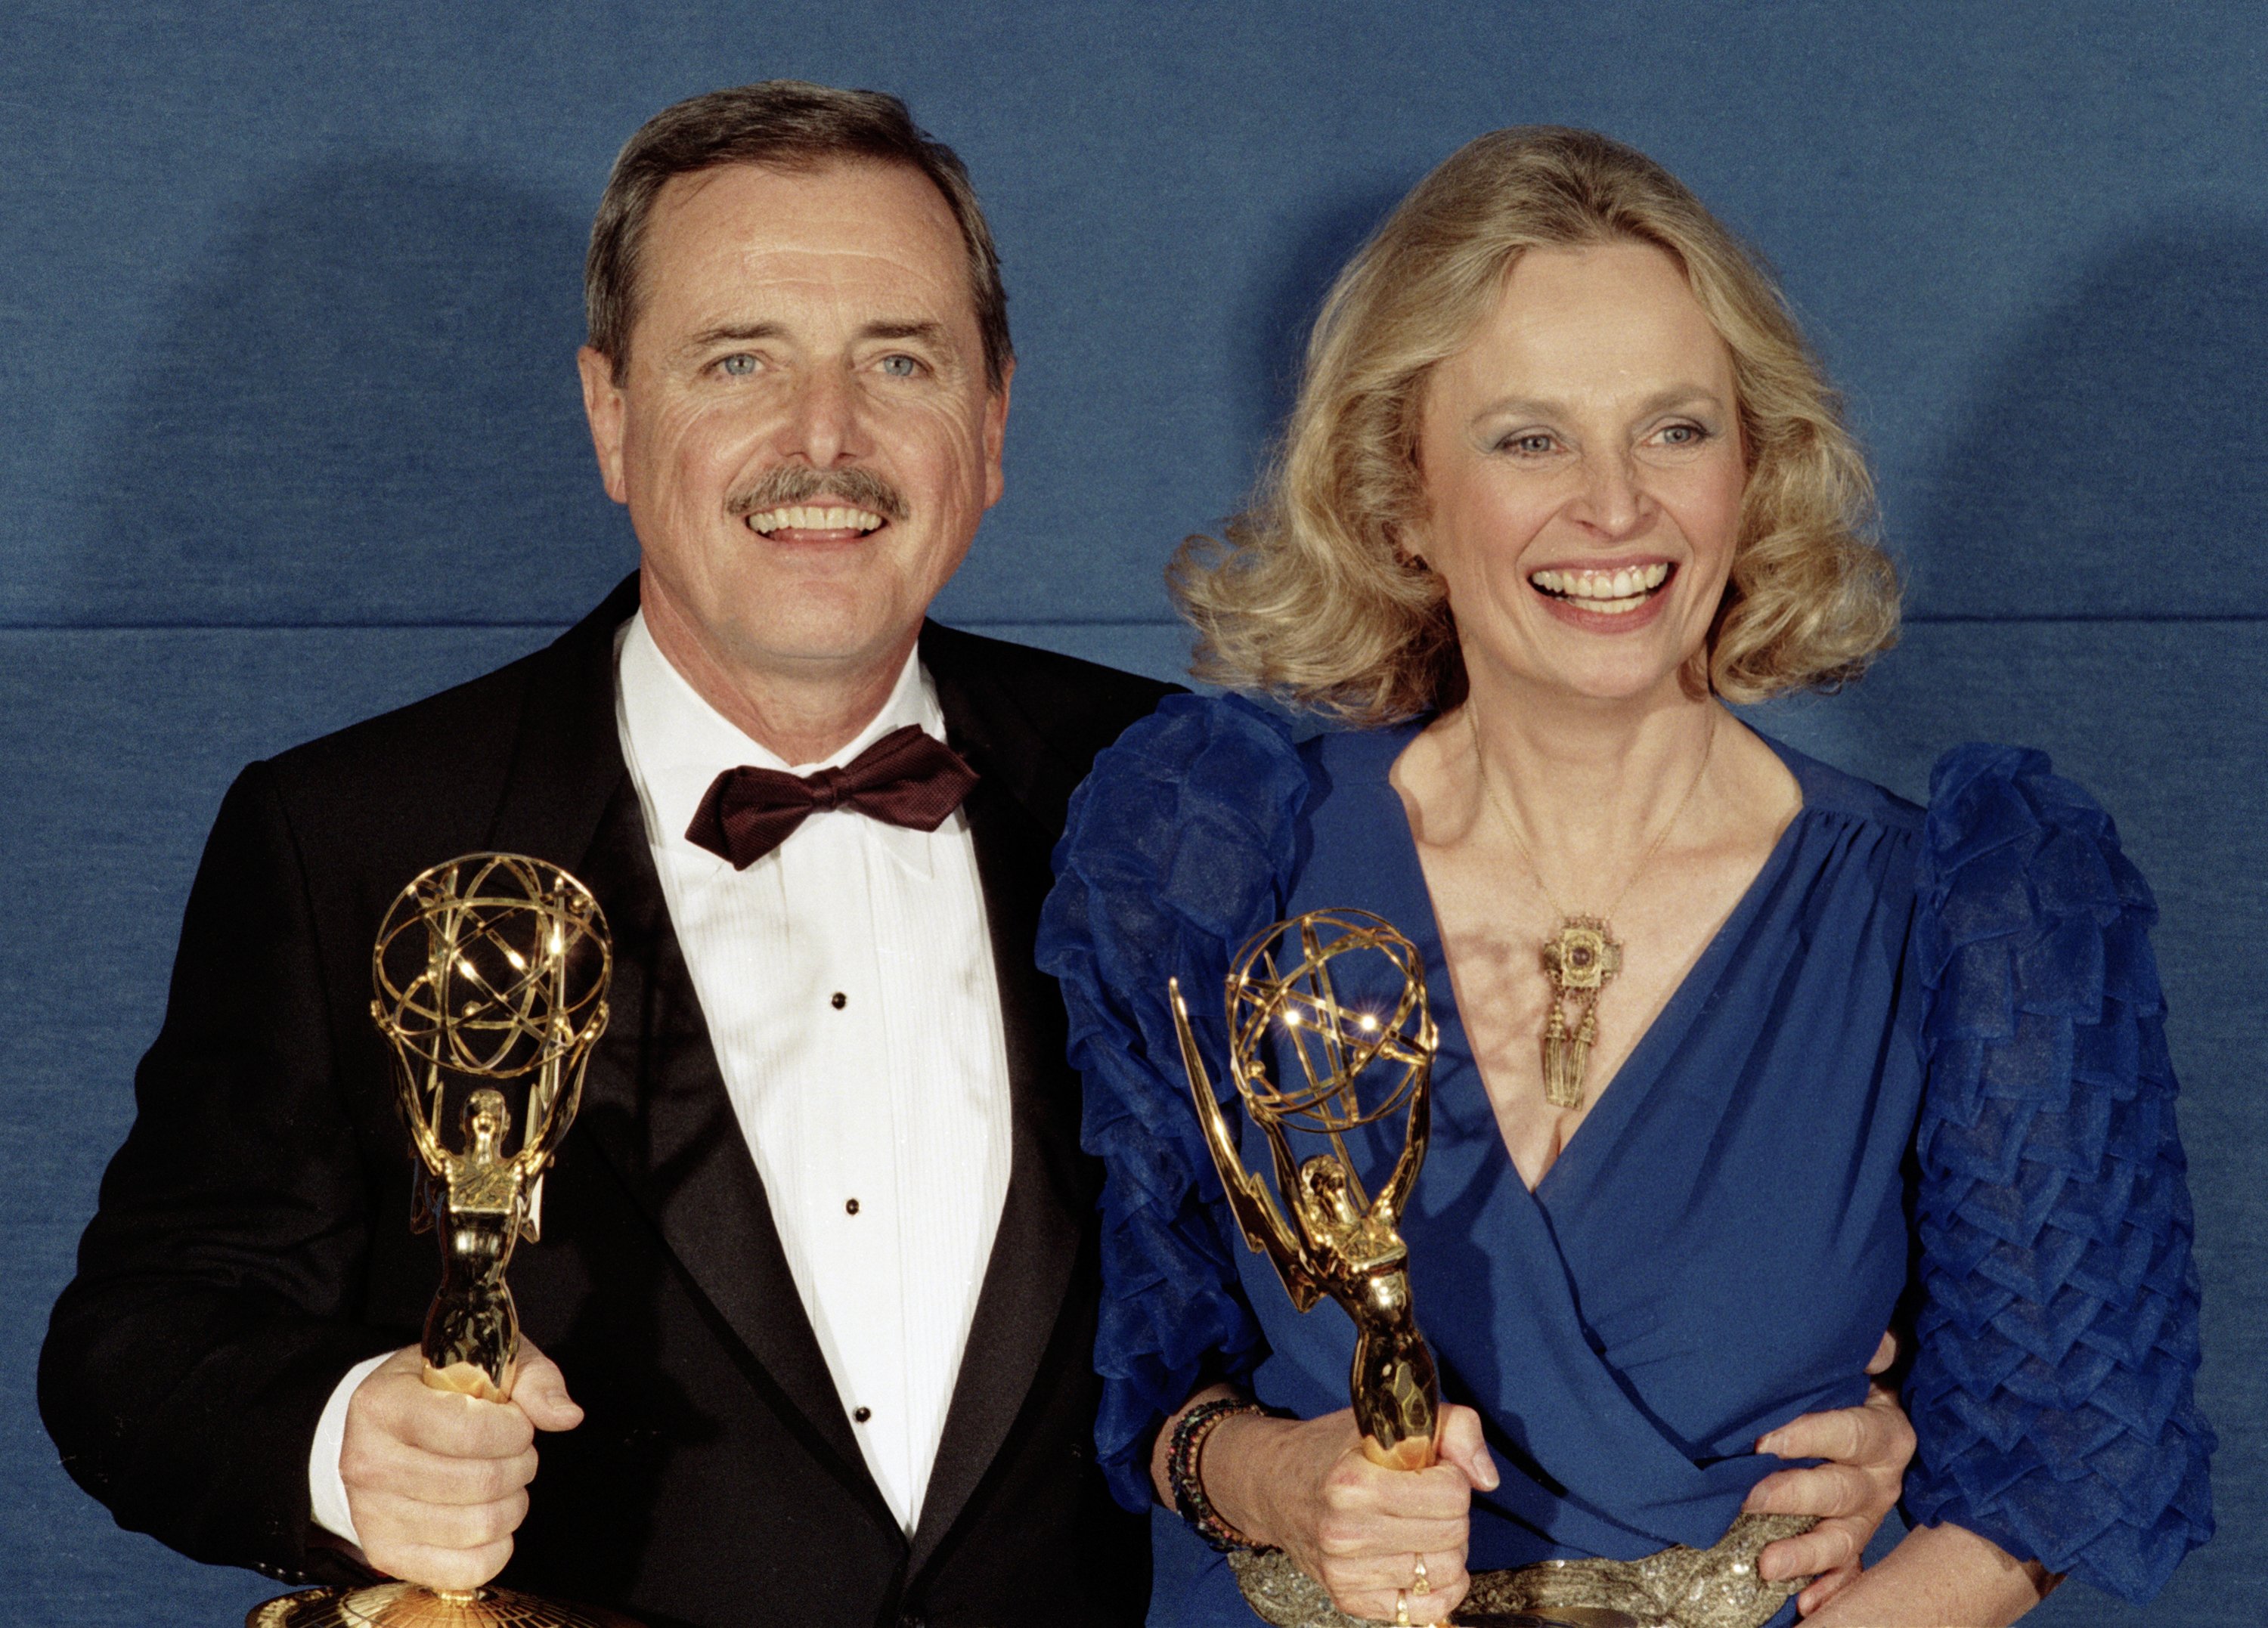 Actor William Daniels and his actress-wife Bonnie Bartlett celebrate their Emmy Awards backstage at the Emmy Awards show on September 21, 1986 in Pasadena, California. | Source: Getty Images